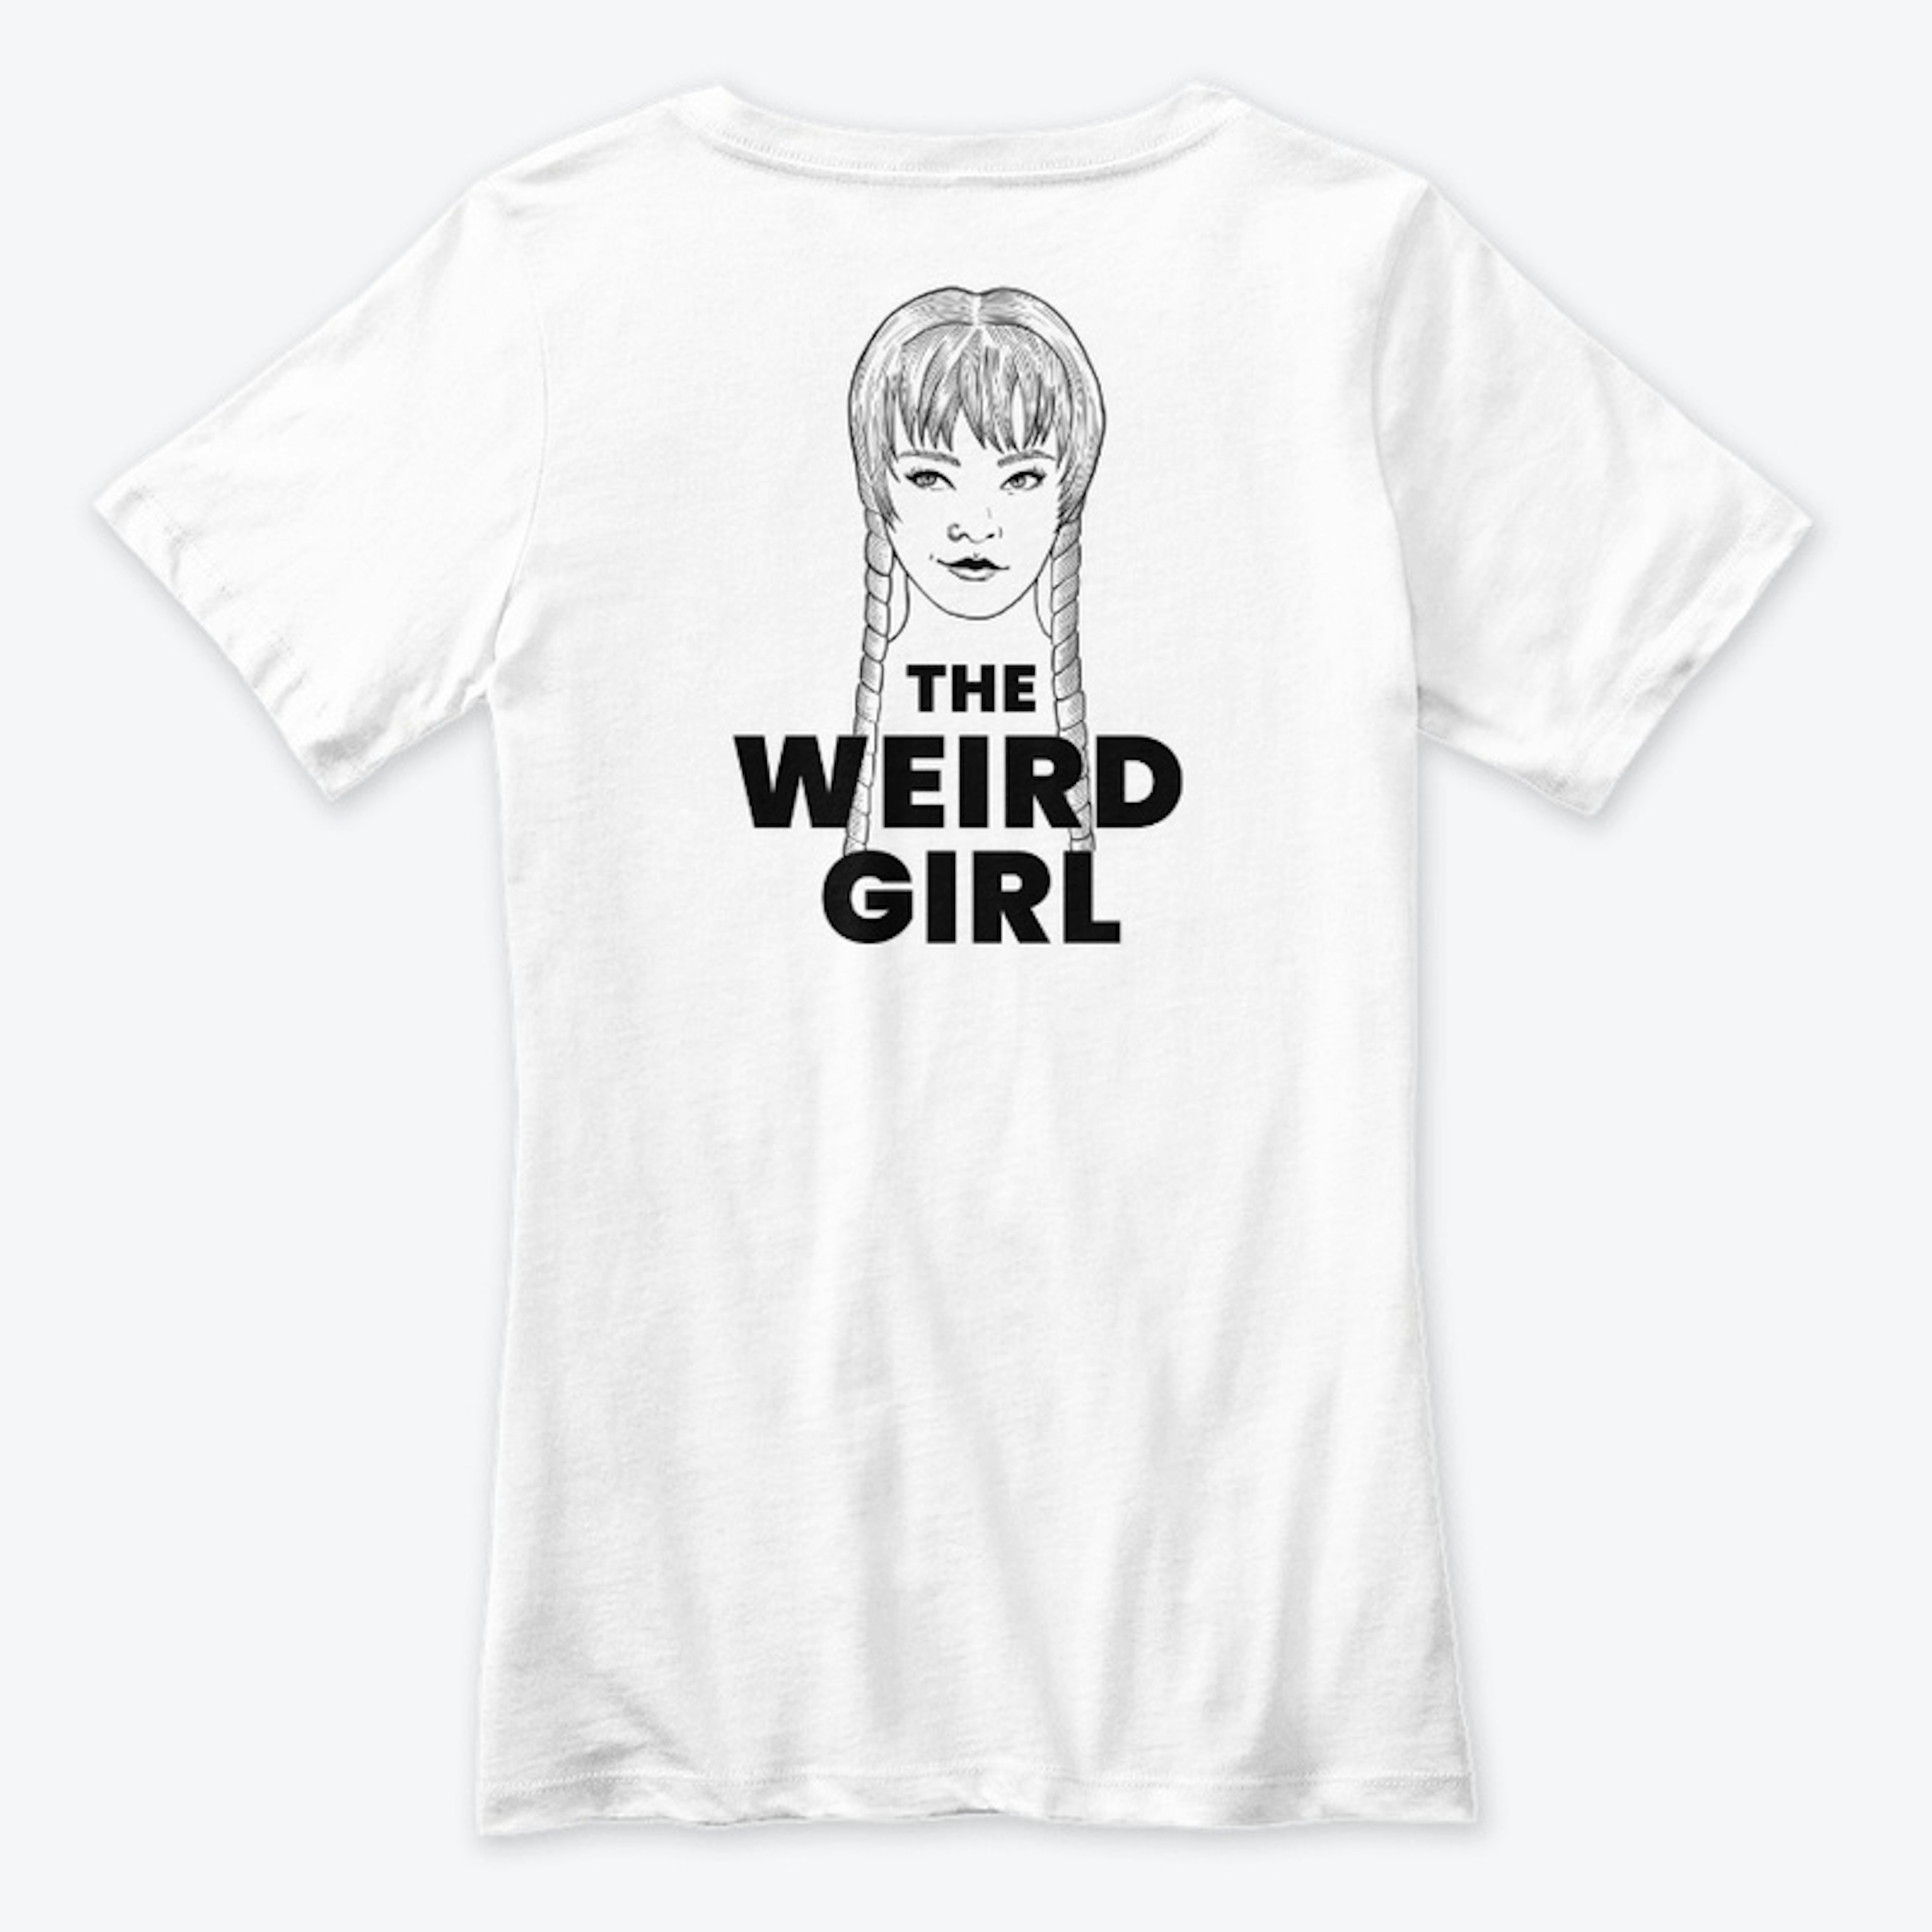 The Weird Girl - Black and White Ink